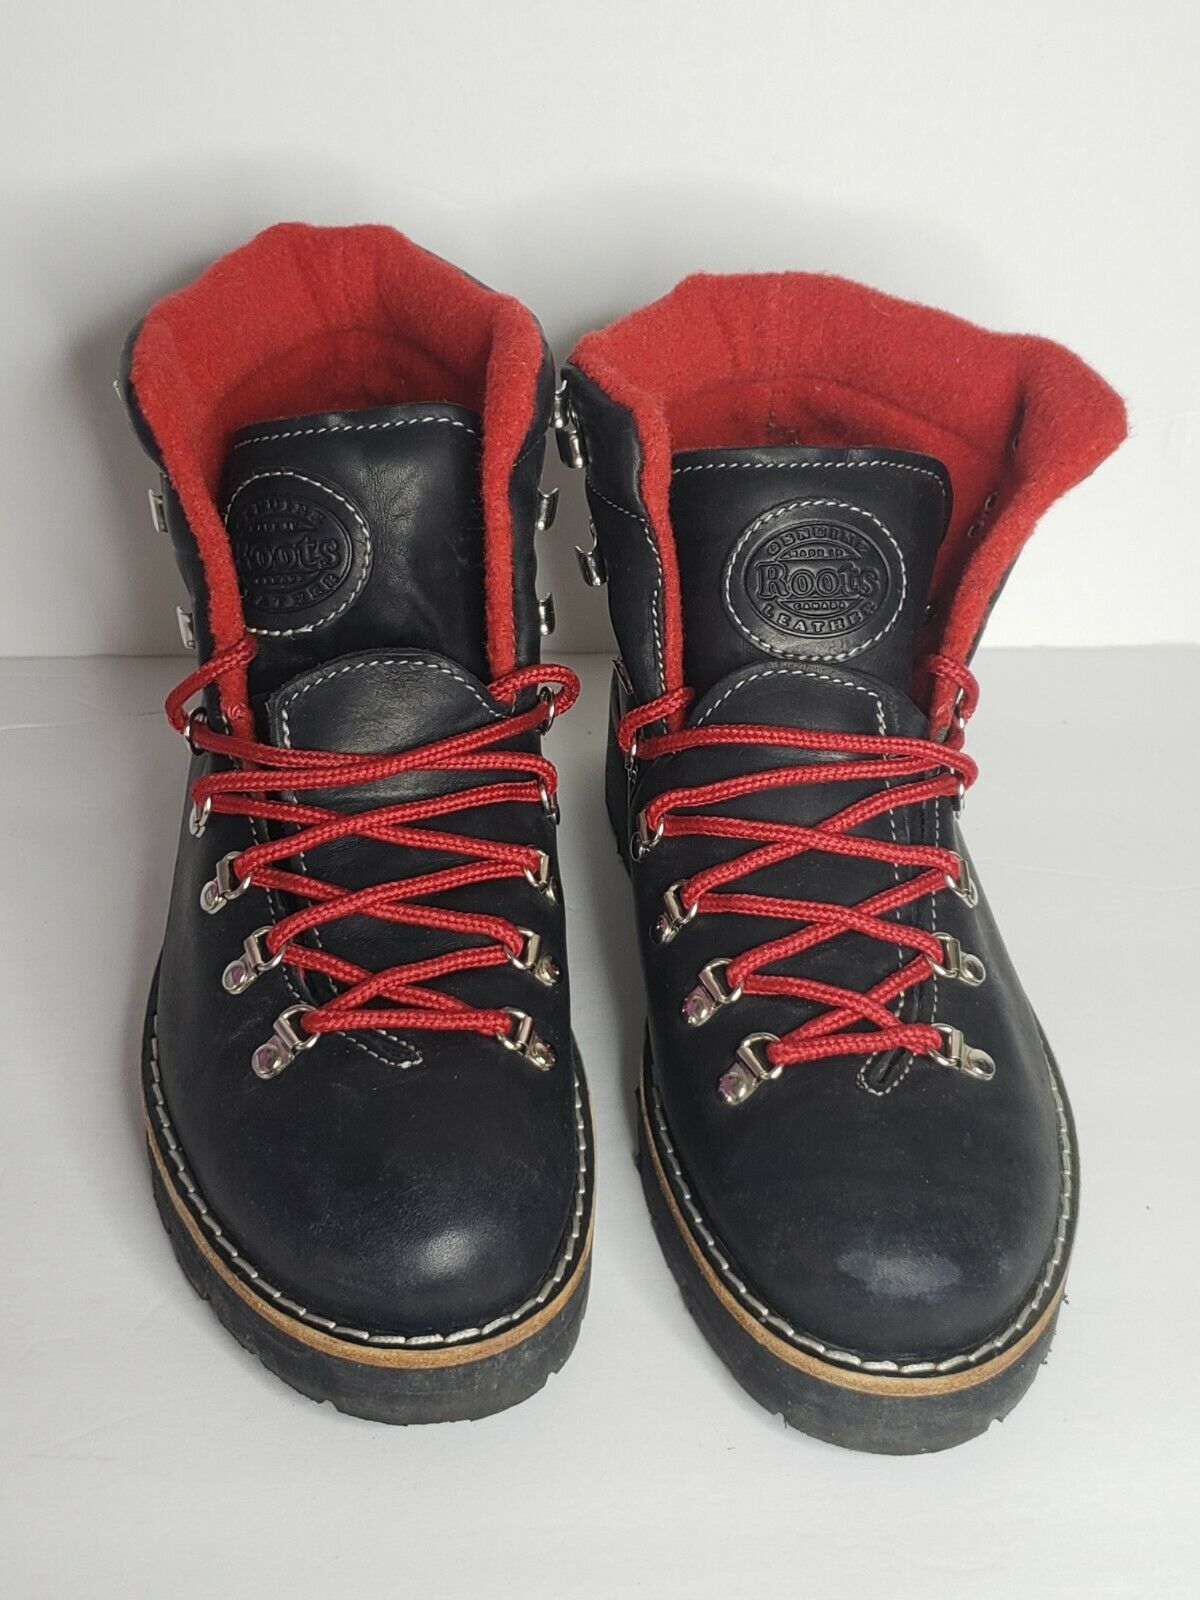 Roots Canada Hiking Boots Size 8.5 L Winter Black Red Leather Rare Men's Outdoor